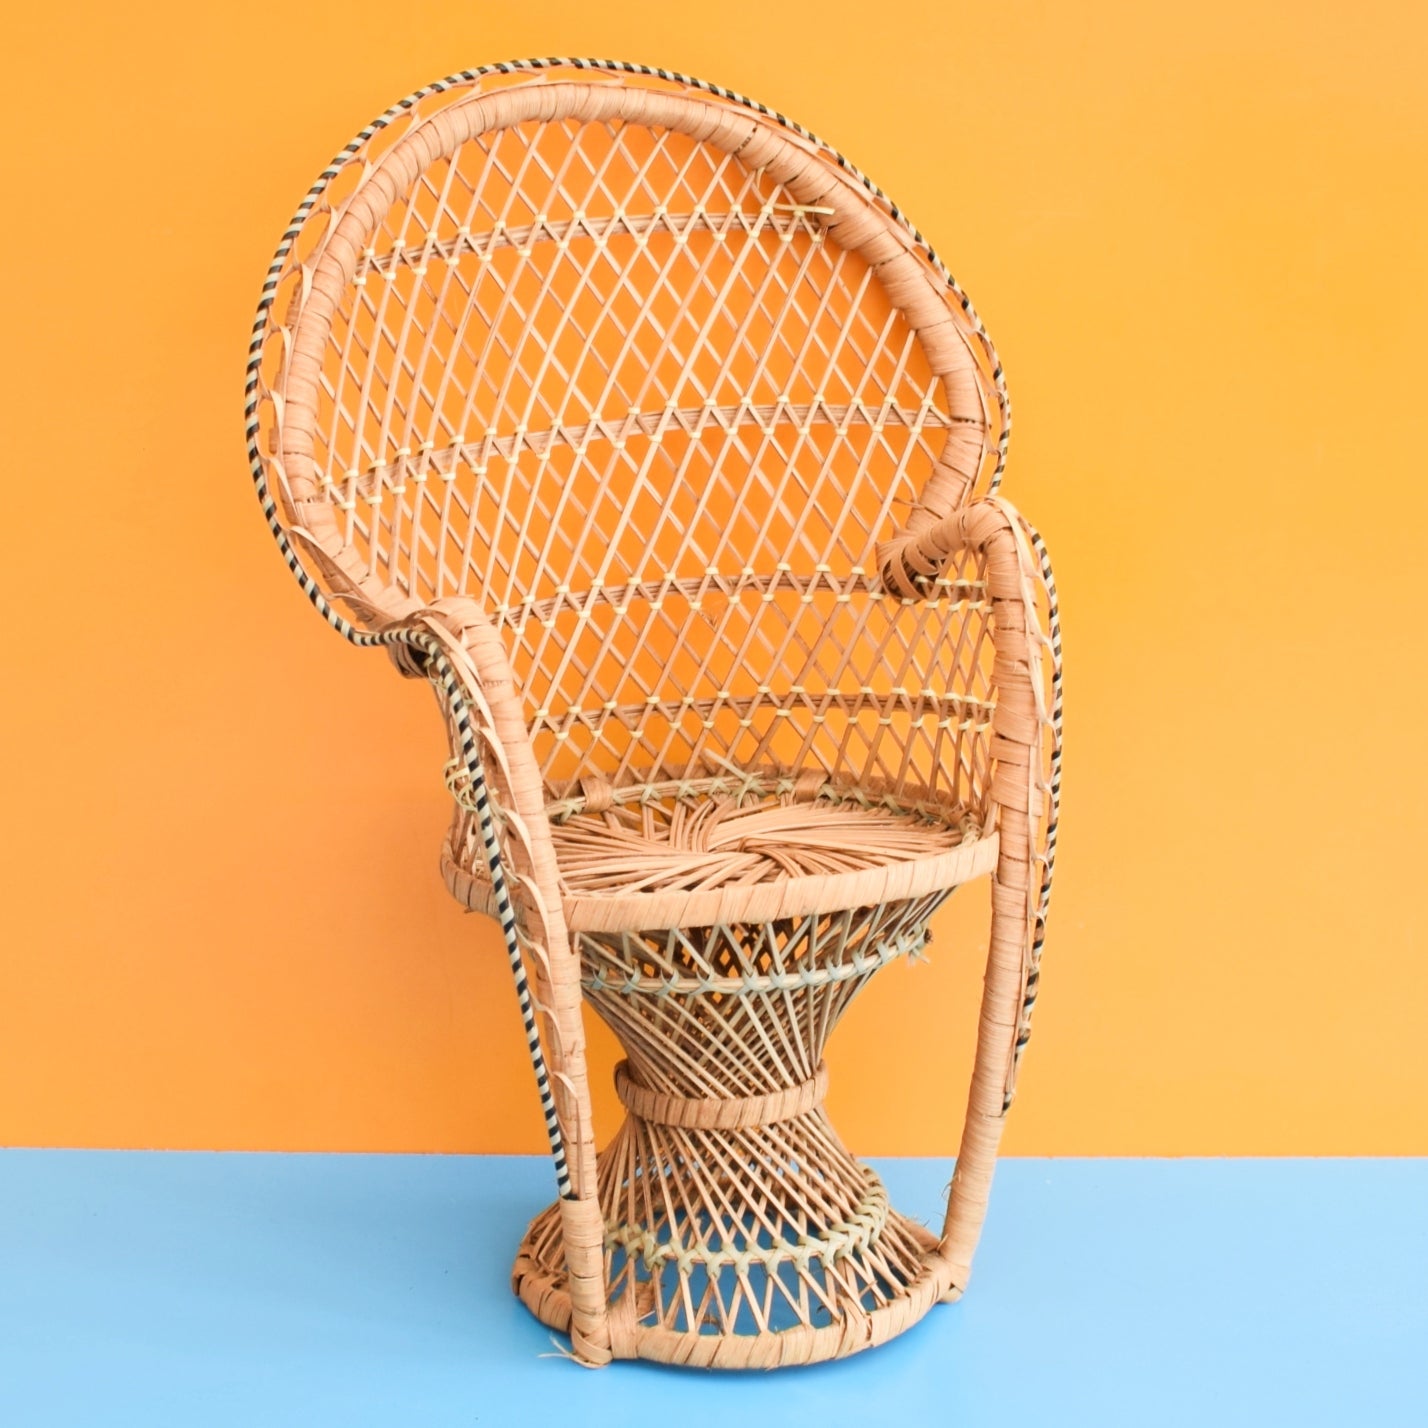 Vintage 1970s Mini Wicker Peacock Chair / Plant Stand